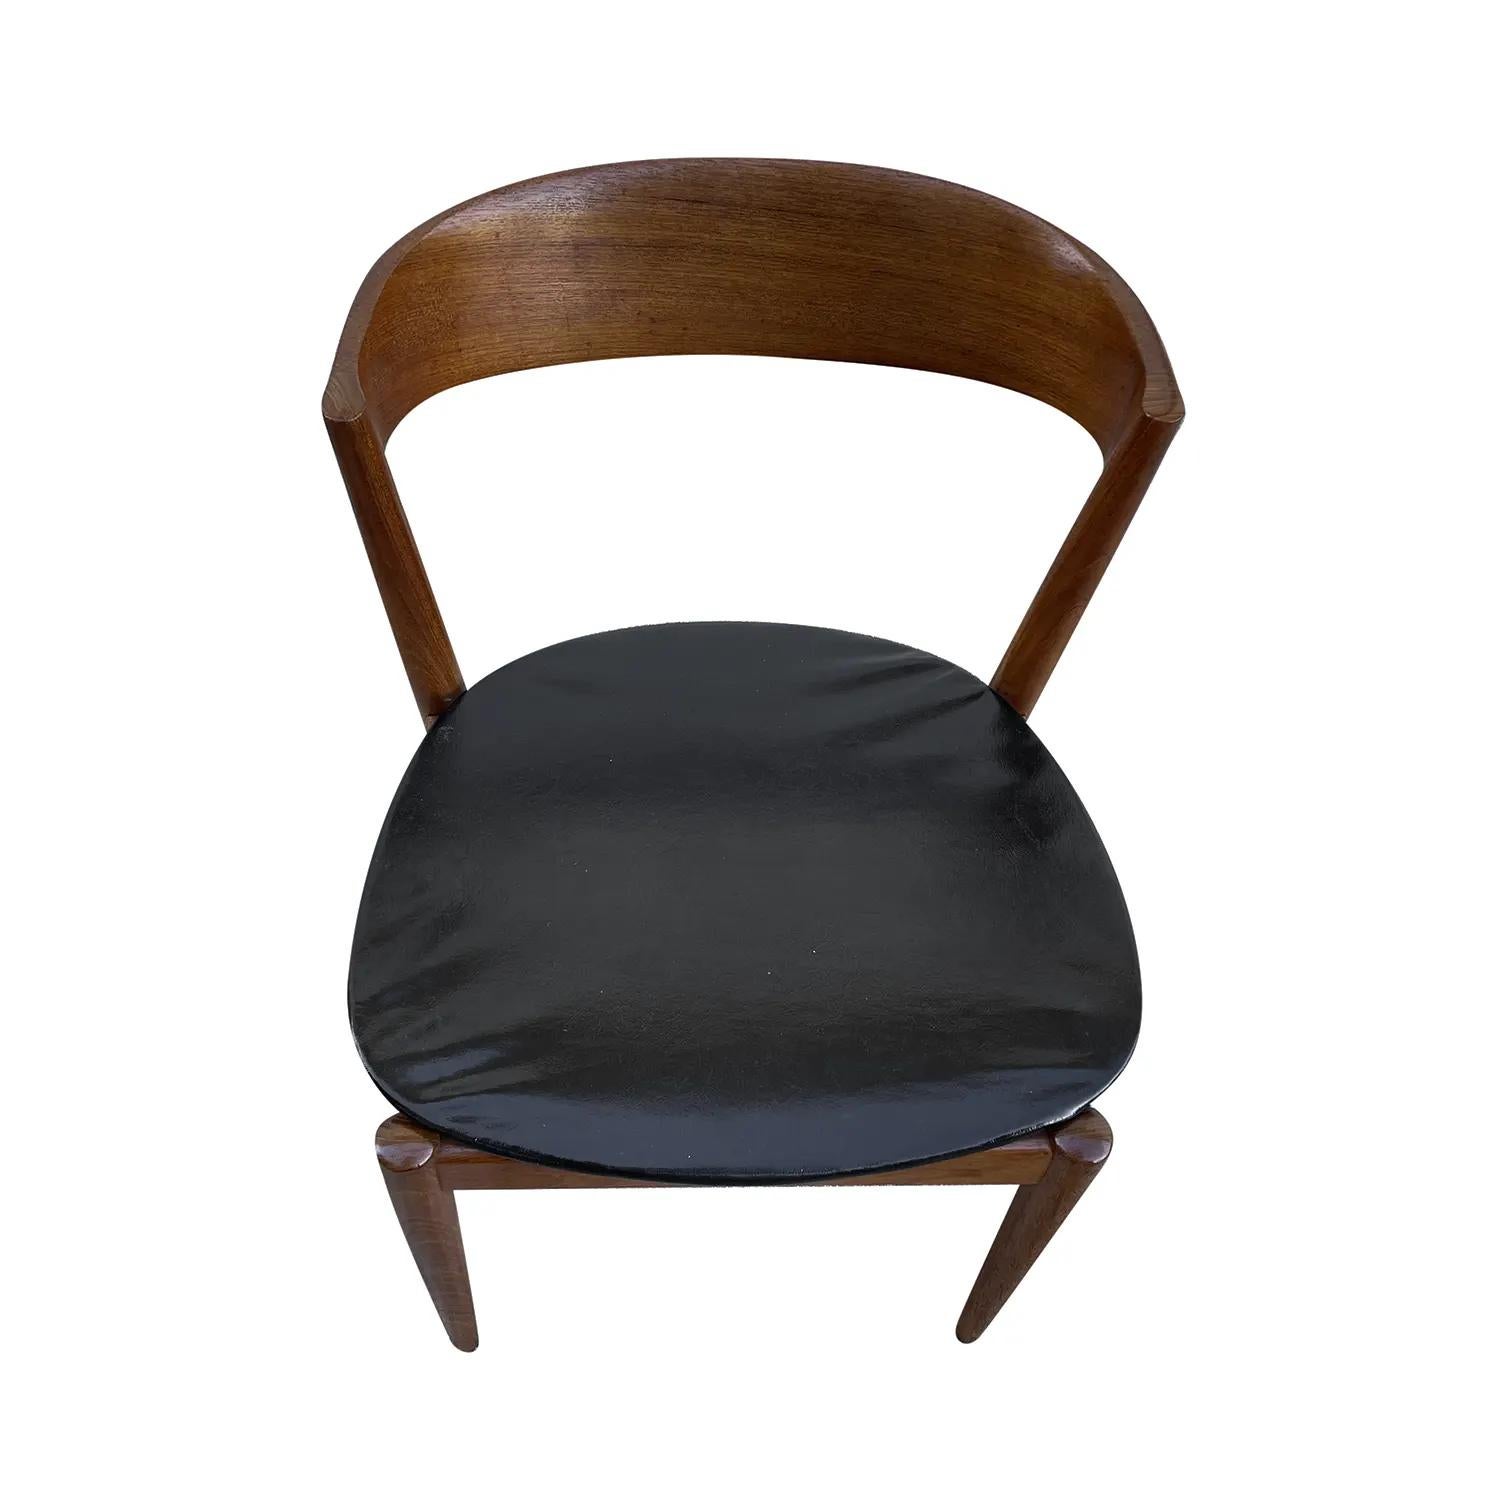 Hand-Carved 20th Century Danish Vintage Teak Side Chair - Scandinavian Faux Leather Chair For Sale